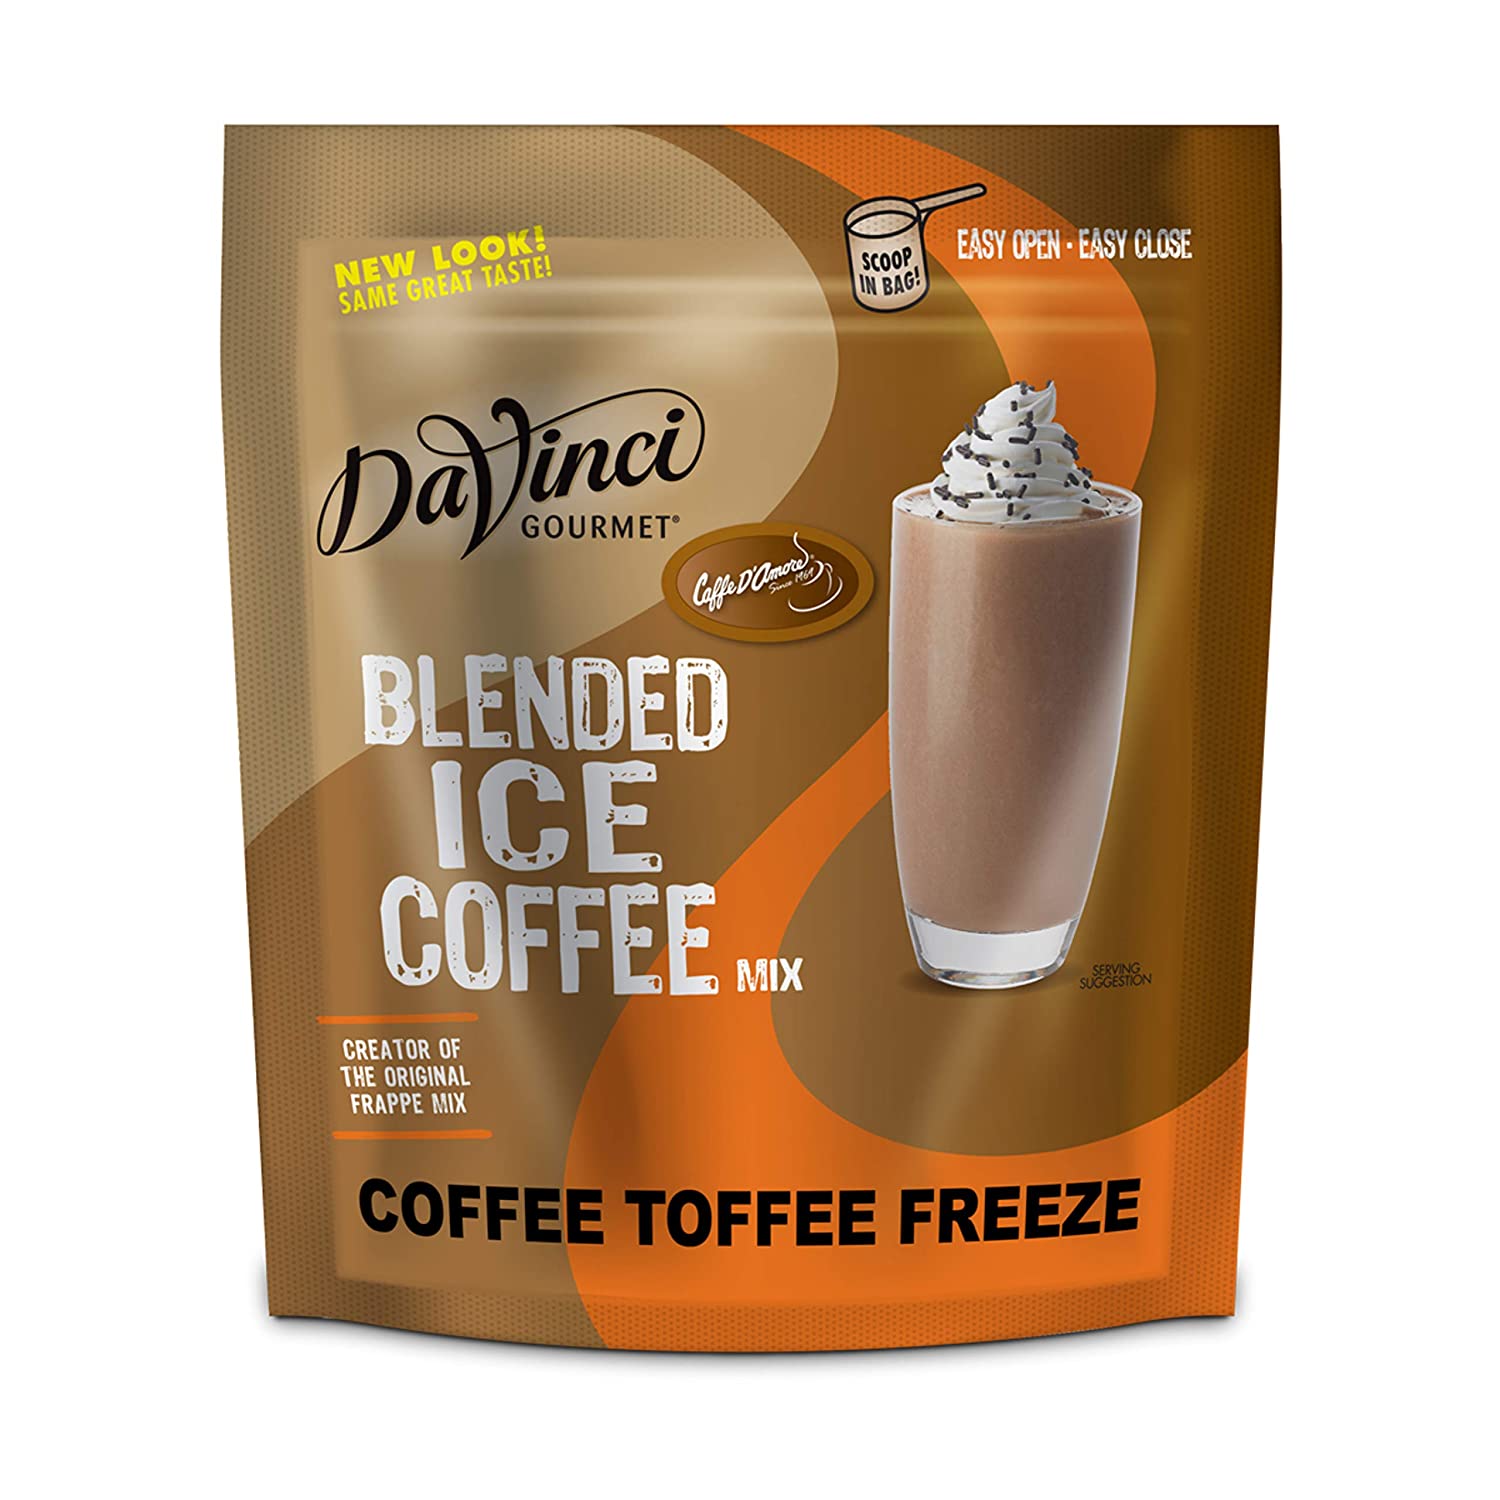 DaVinci Frappe Freeze Coffee Toffee Blended Drink Mix, (Amazon) $18.27